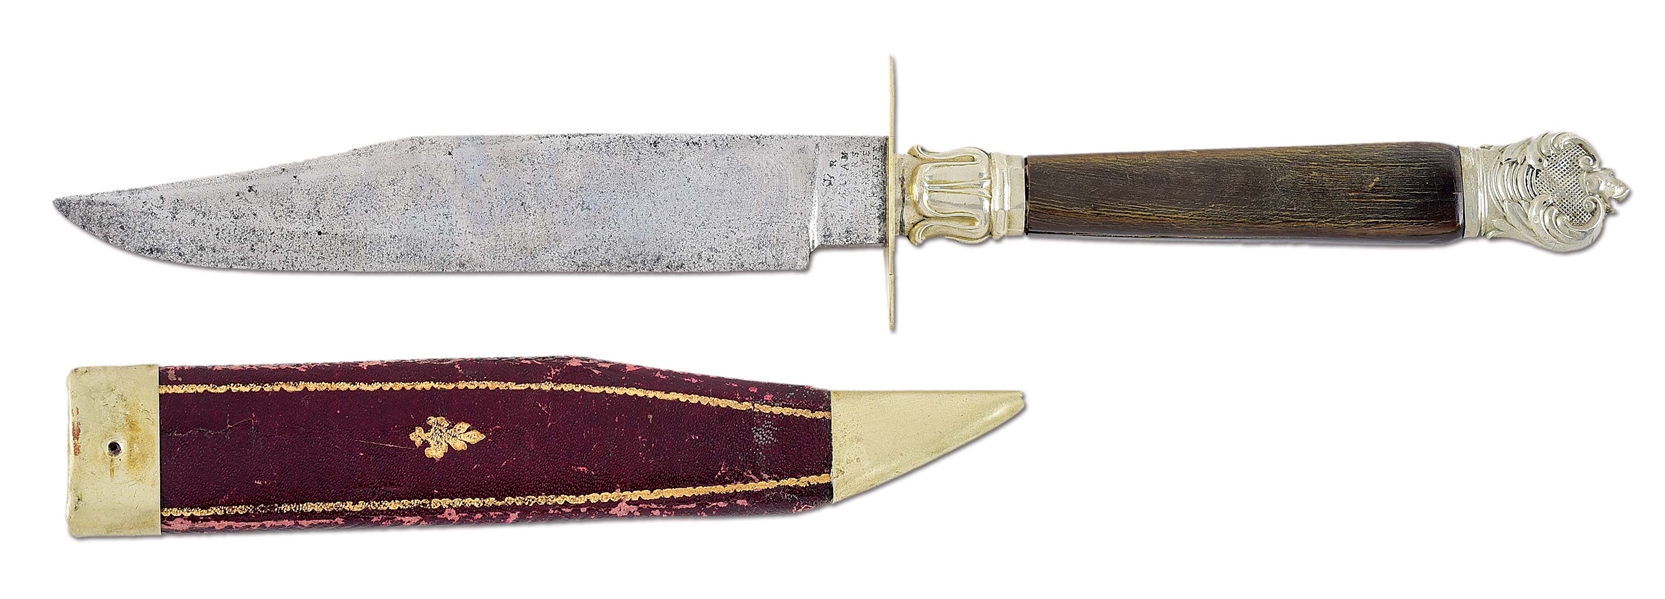 VICTORIAN BRITISH BOWIE KNIFE BY WILLIAM RODGERS